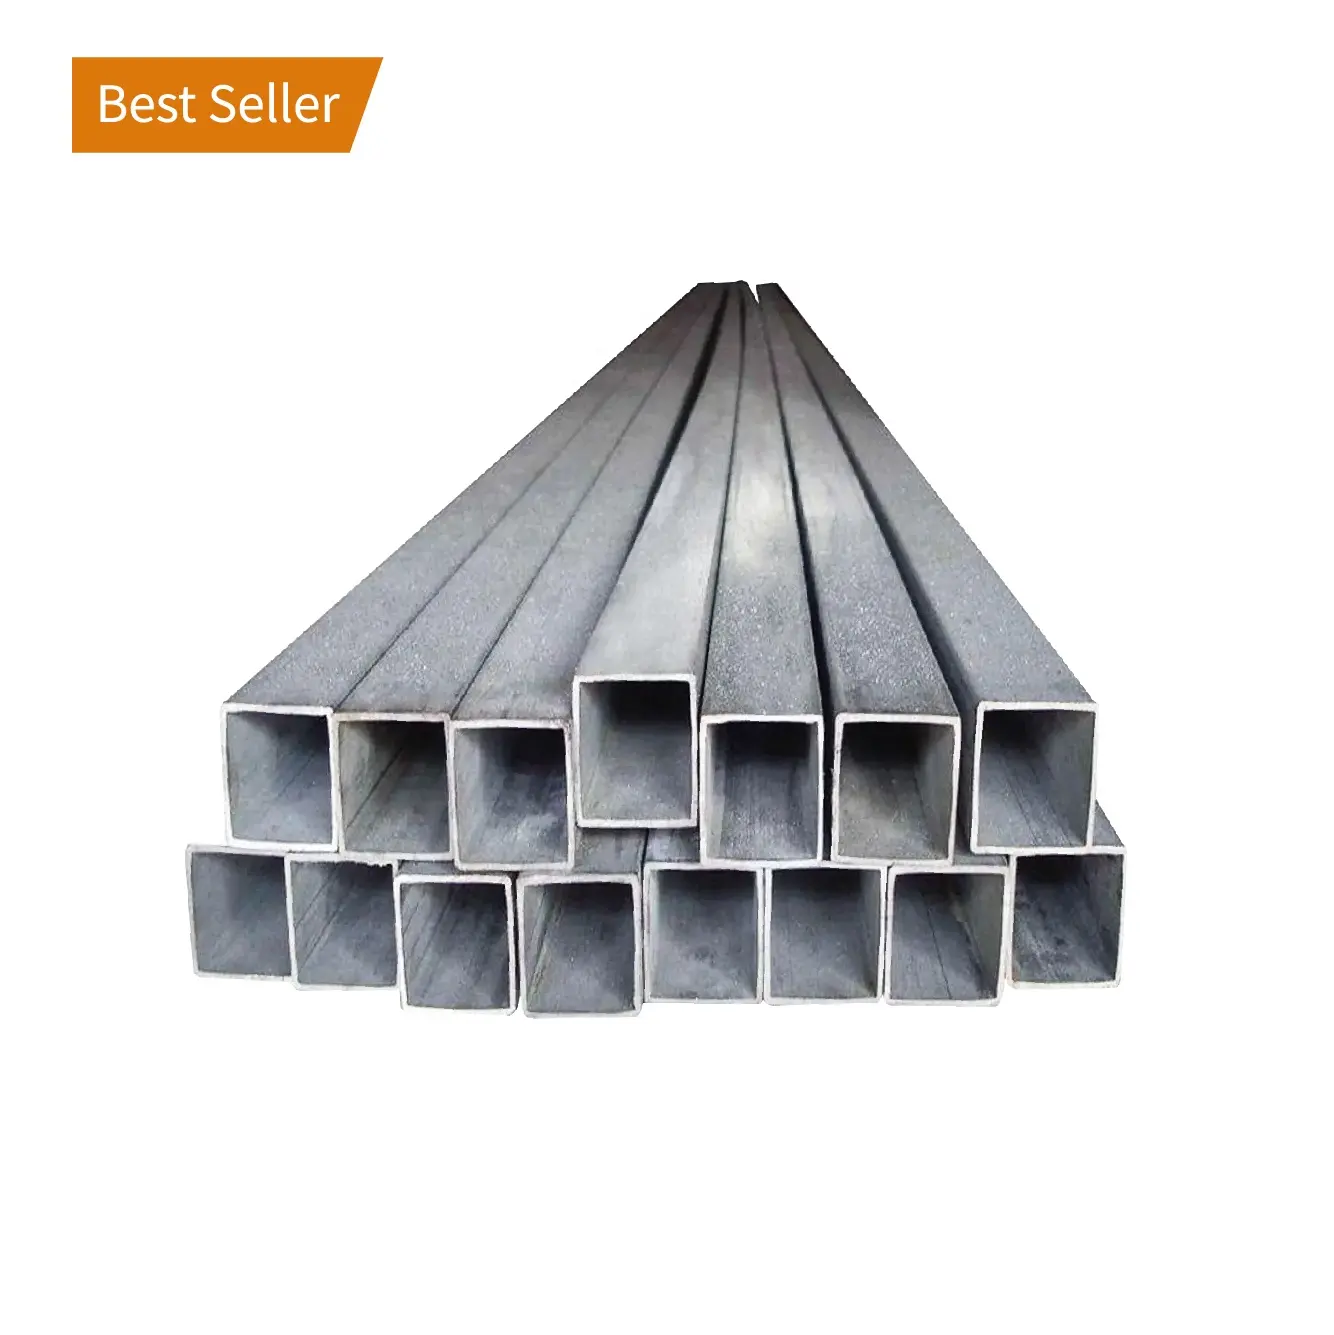 China manufacture hot dipped rectangular hollow galvanized welded square pipe and tube for construction